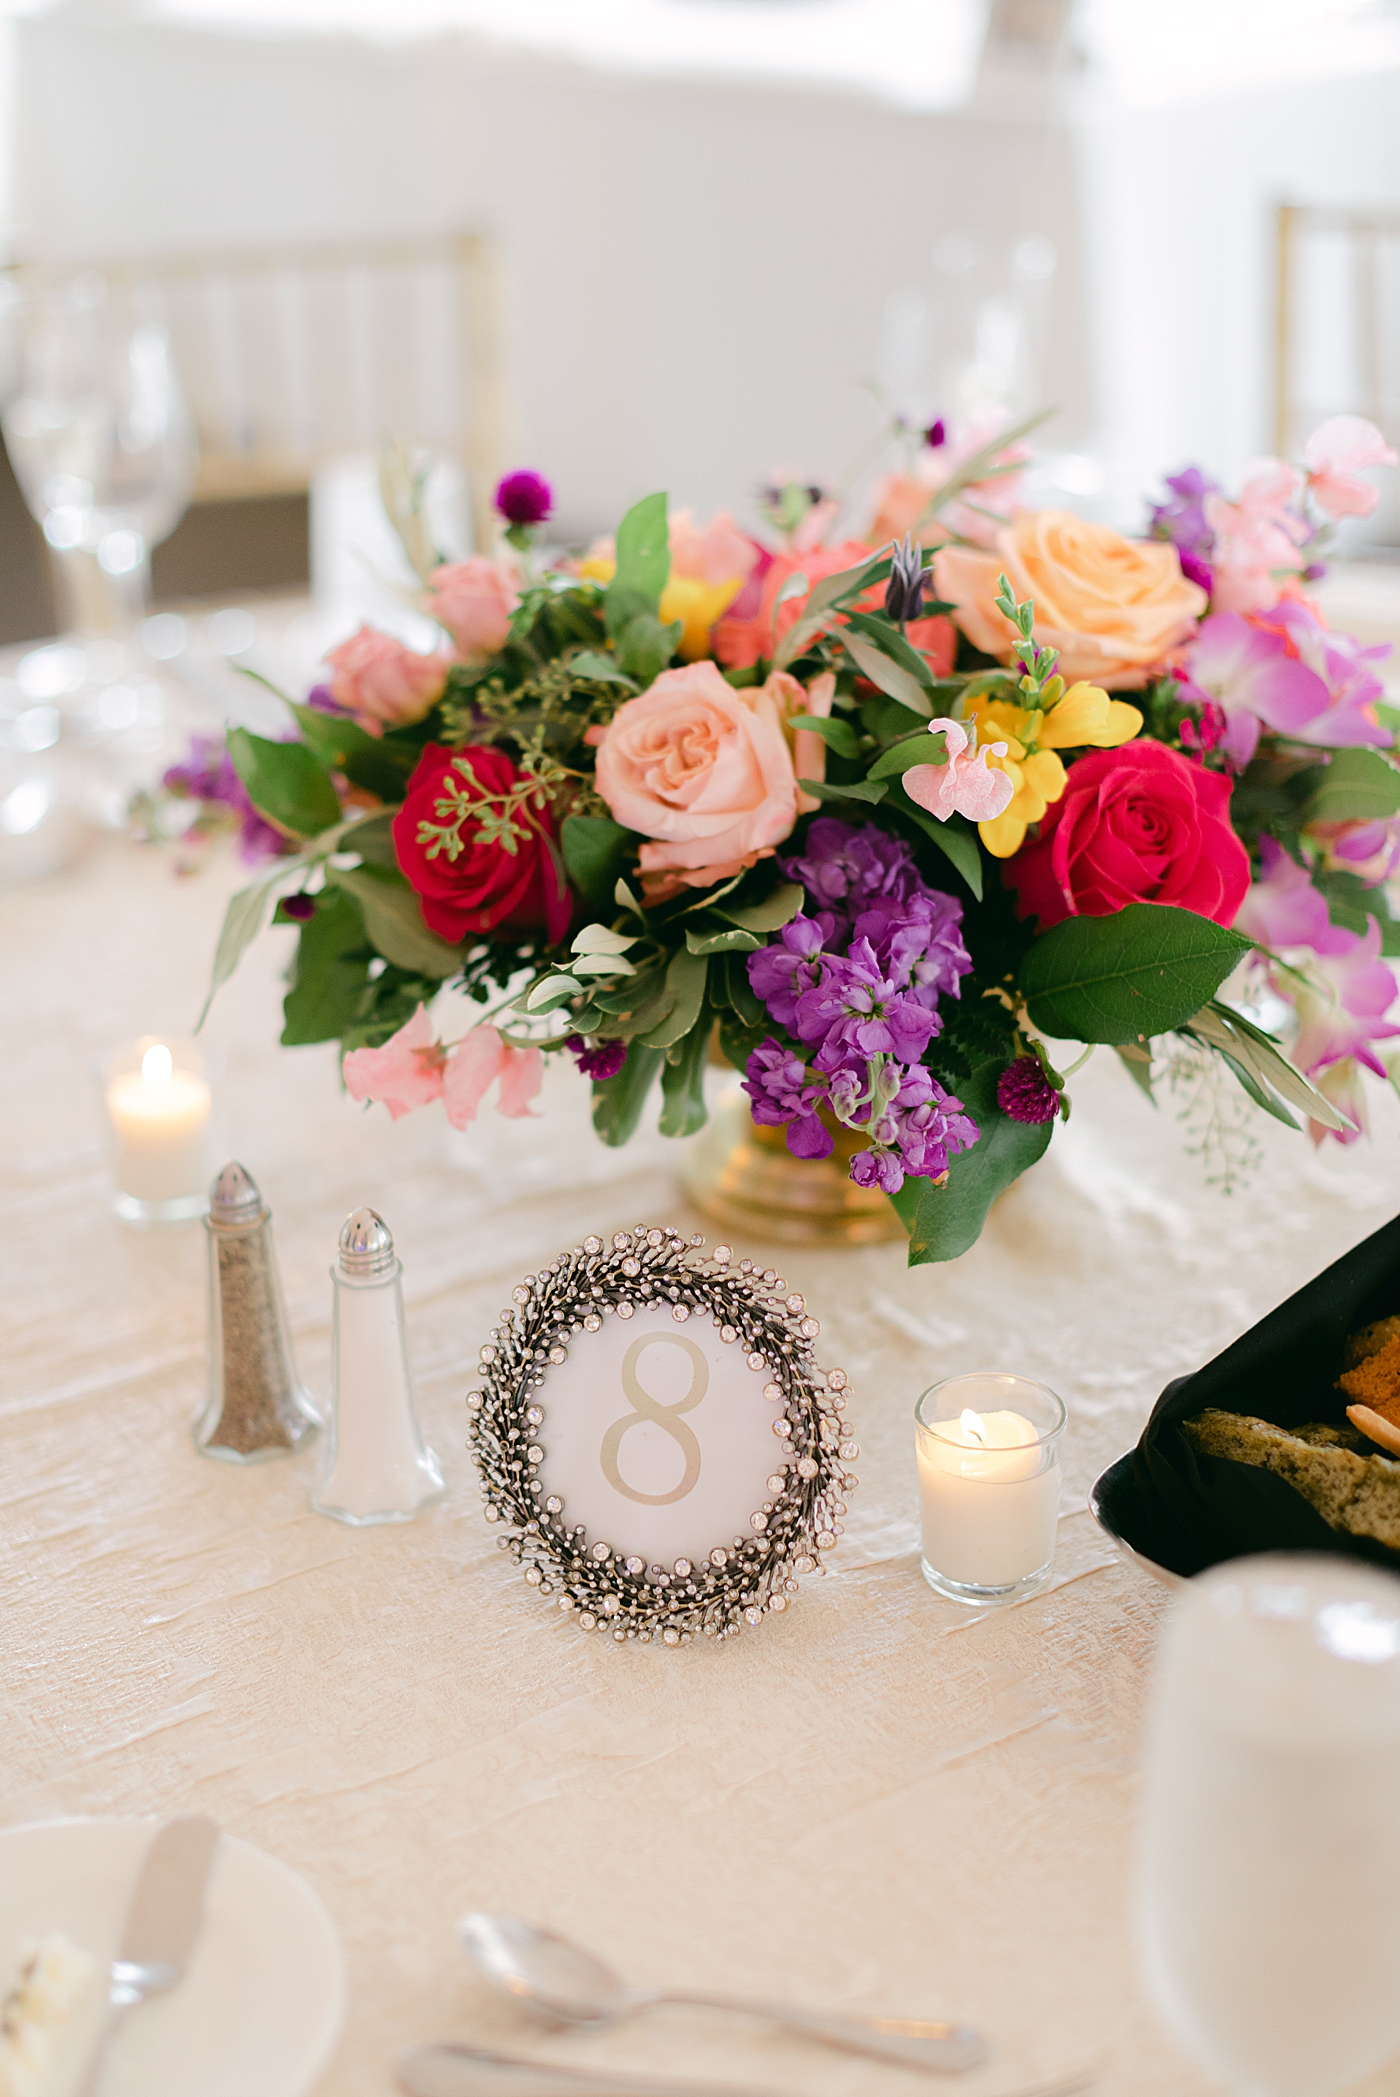 Reception table details during their Sagamore Wedding | Image by Hope Helmuth Photography